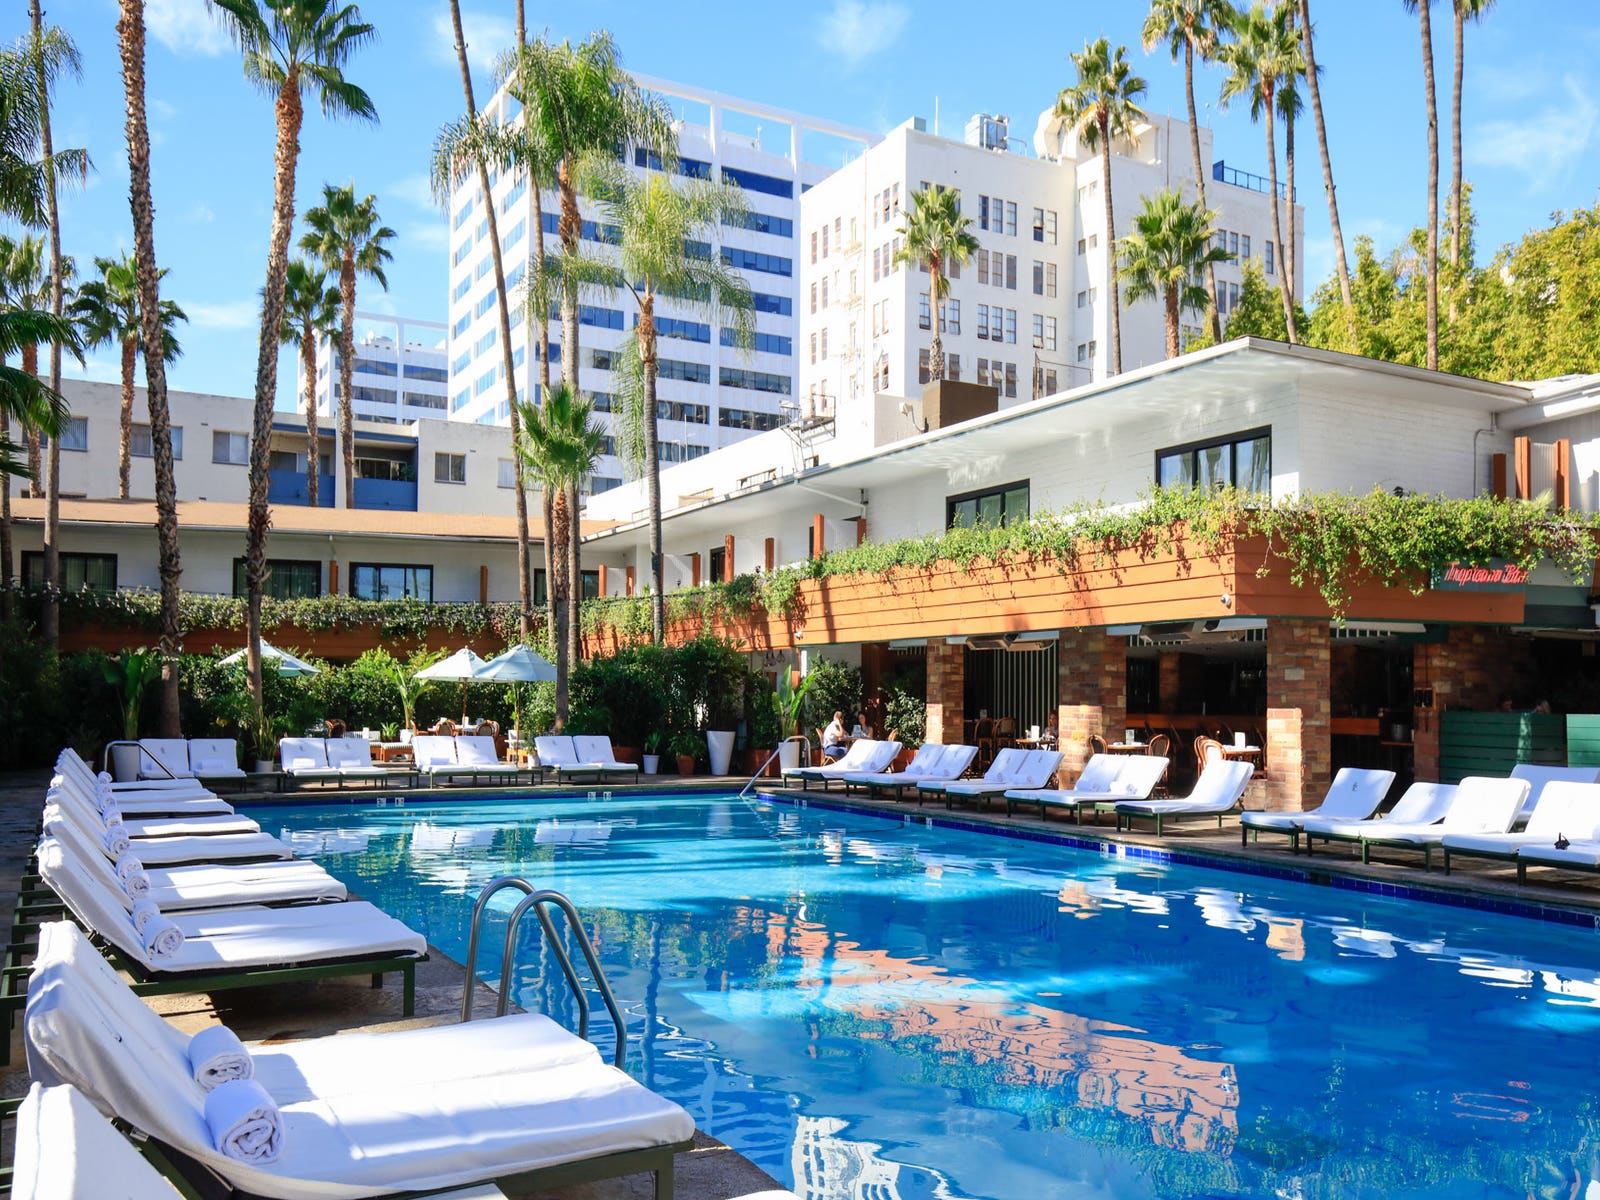 The Hottest Hotel Pools in Los Angeles | Discover Los Angeles